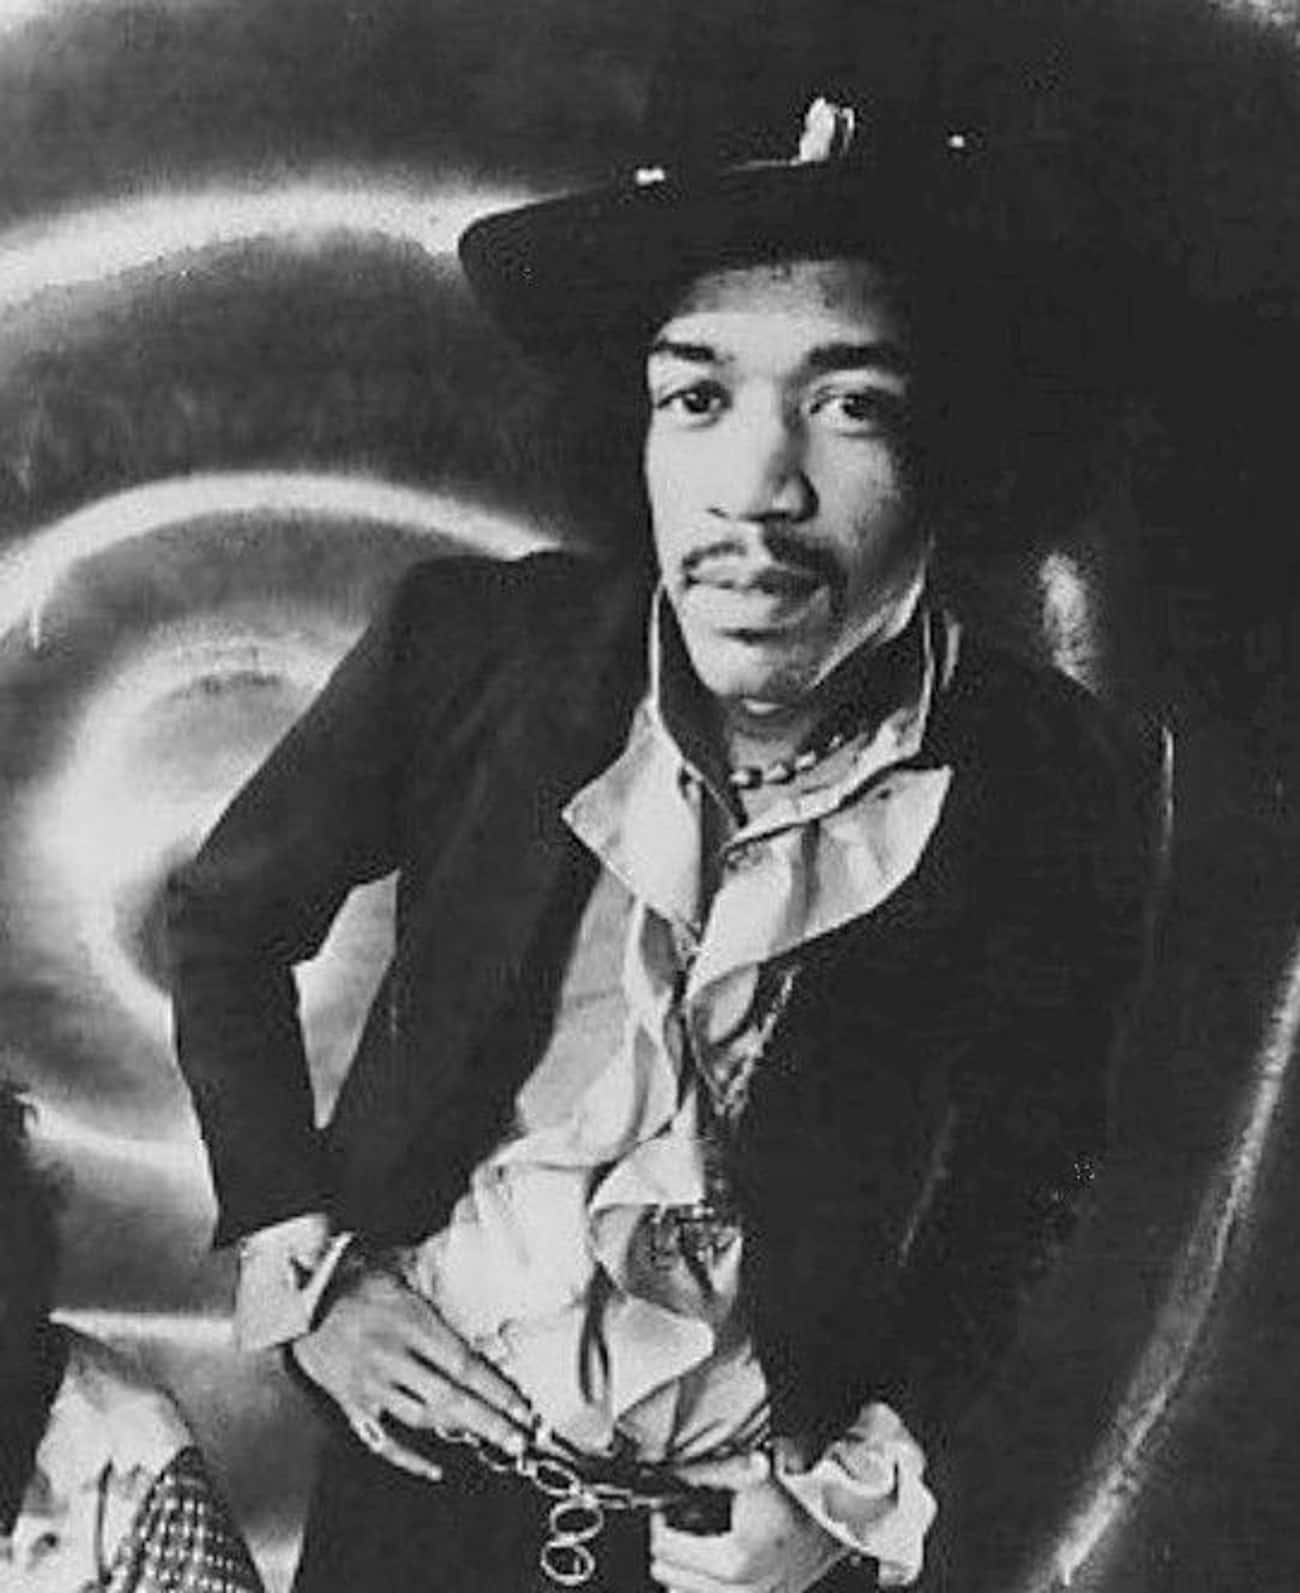 Jimi Hendrix Died At 27 In A London Hotel Room